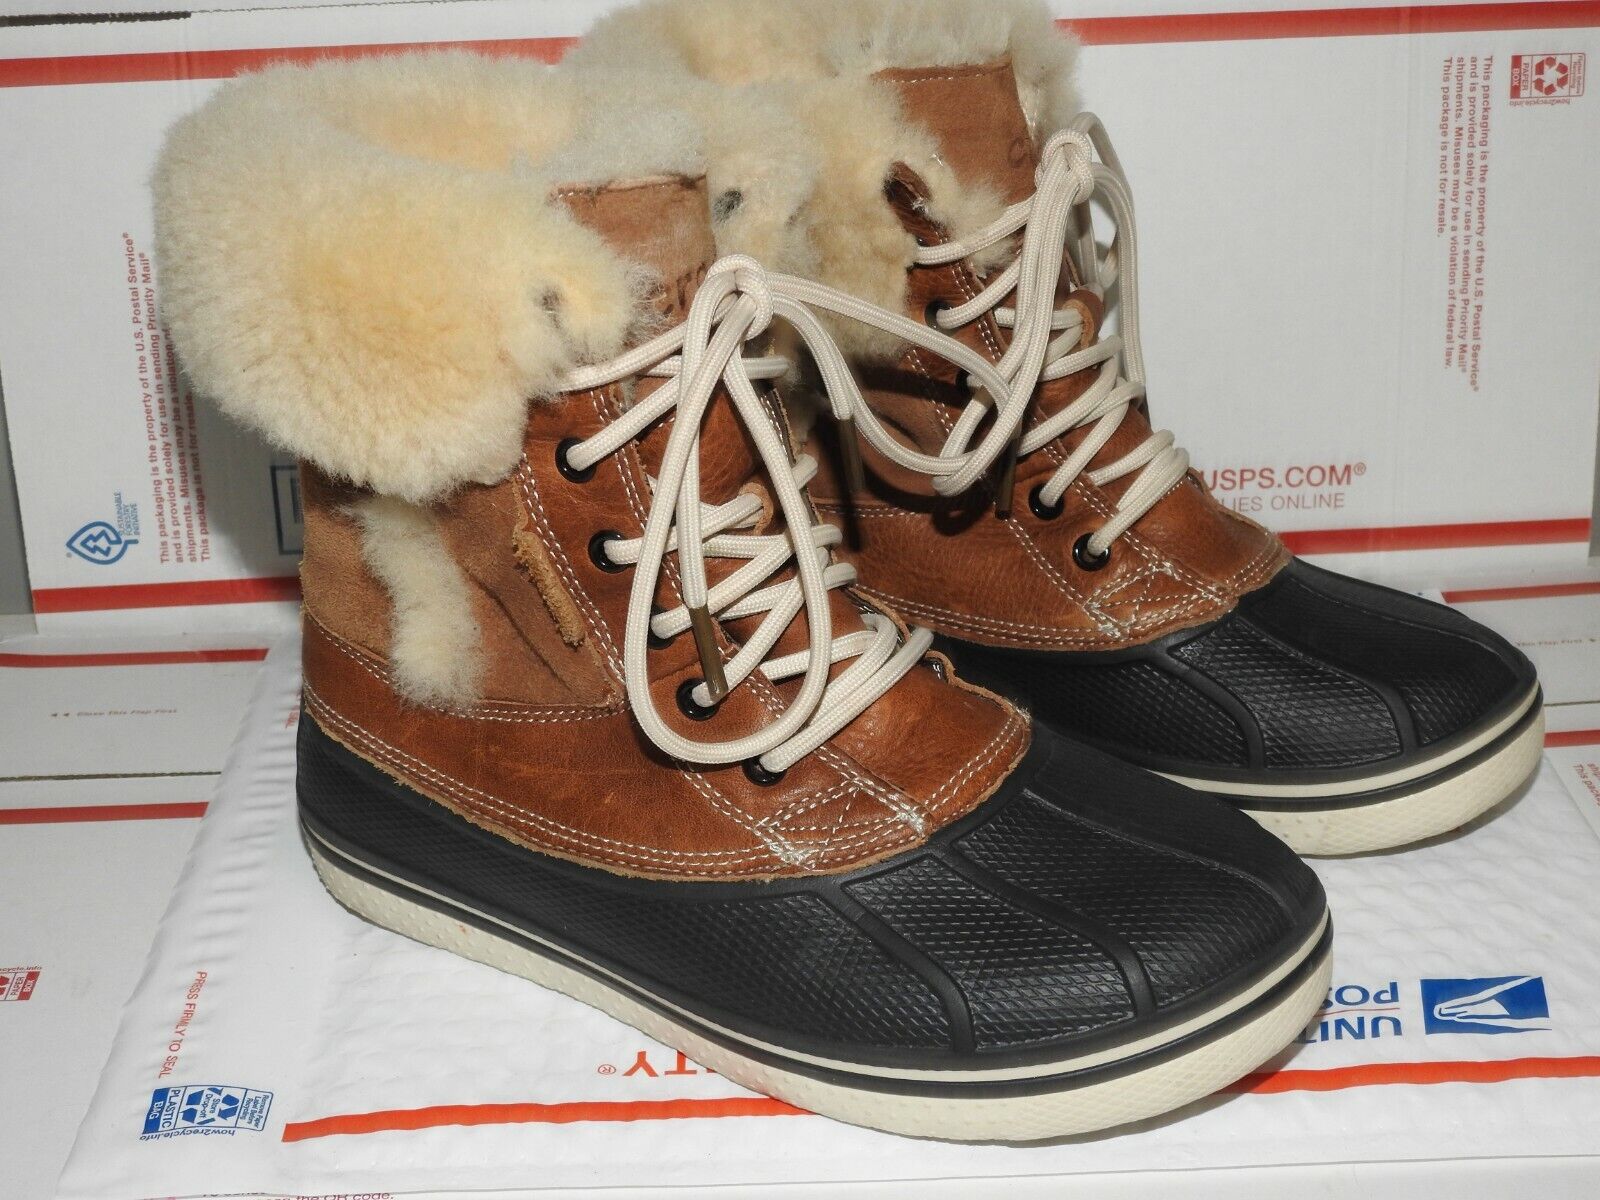 Oppose Diagnose light bulb CROCS ALLCAST LUXE DUCK Winter Boots Brown Leather Faux Fur Lining Sz 7  Lace Up | eBay